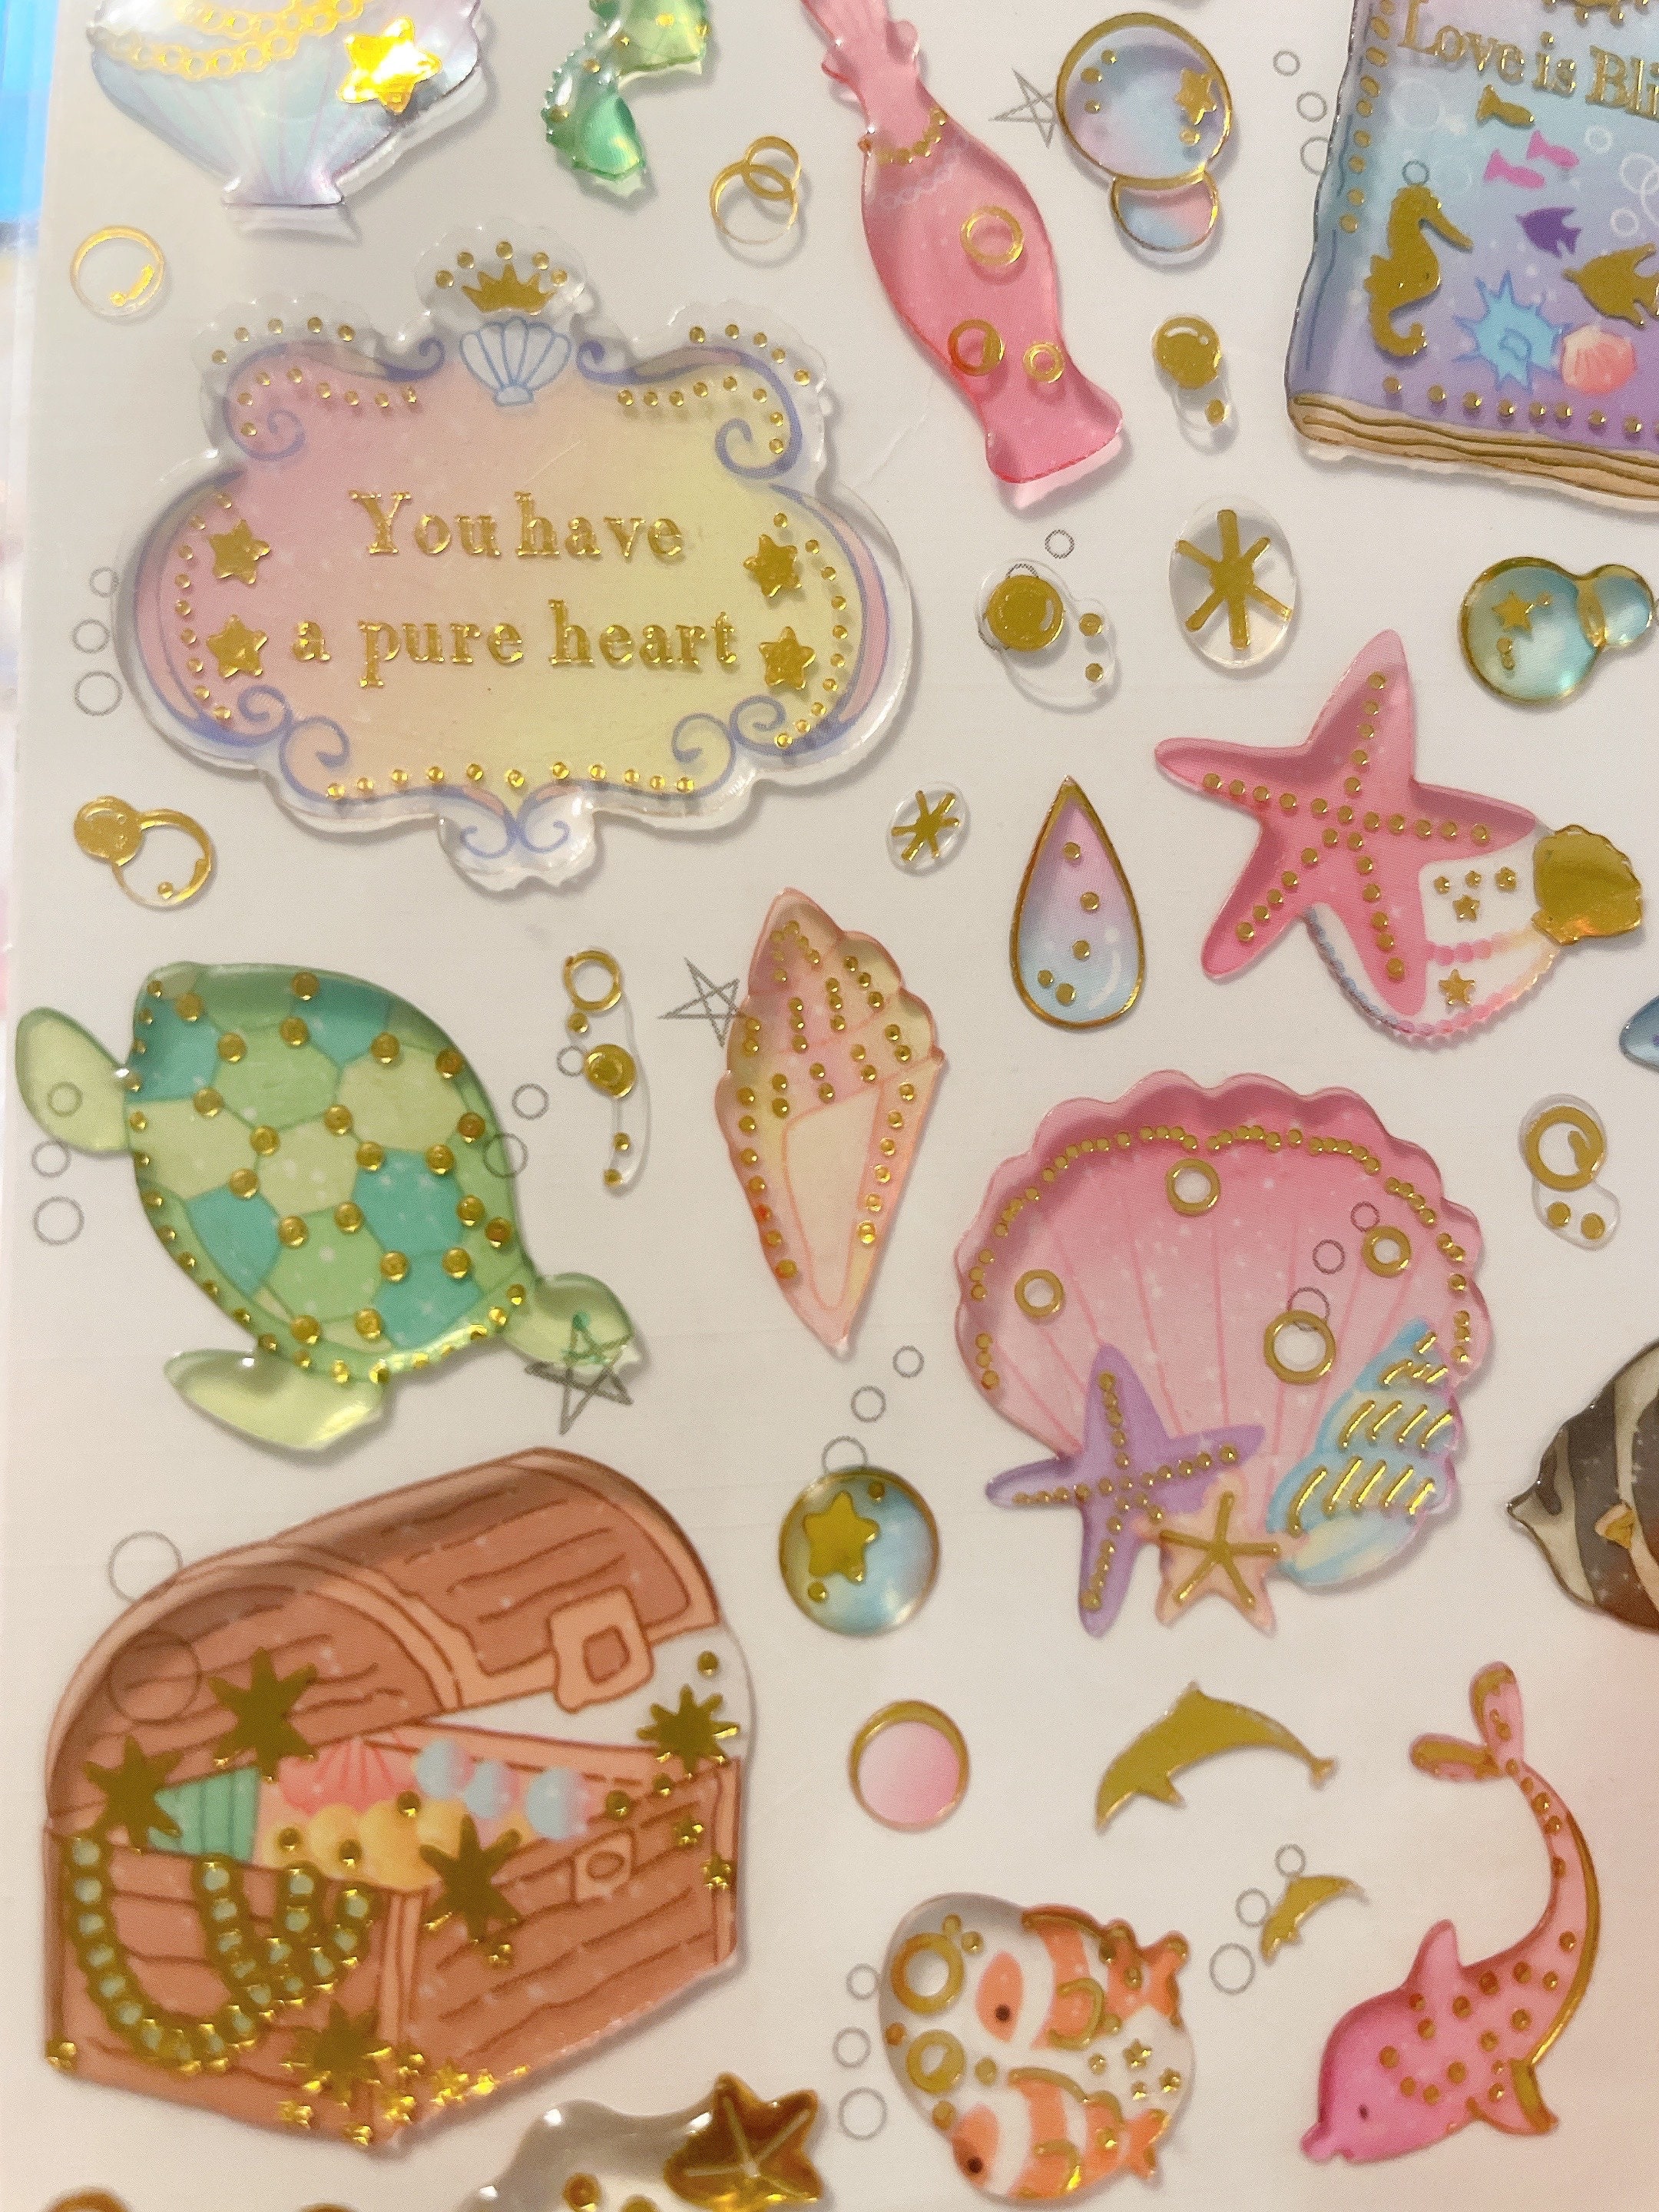 Food Stickers, Maxleaf 6 Sheets Foil Gold Cute 3D Crystal Cakes Snack  Stickers for Scrapbook Laptops Dairy Decoration Epoxy Resin Scrapbooking,  Great